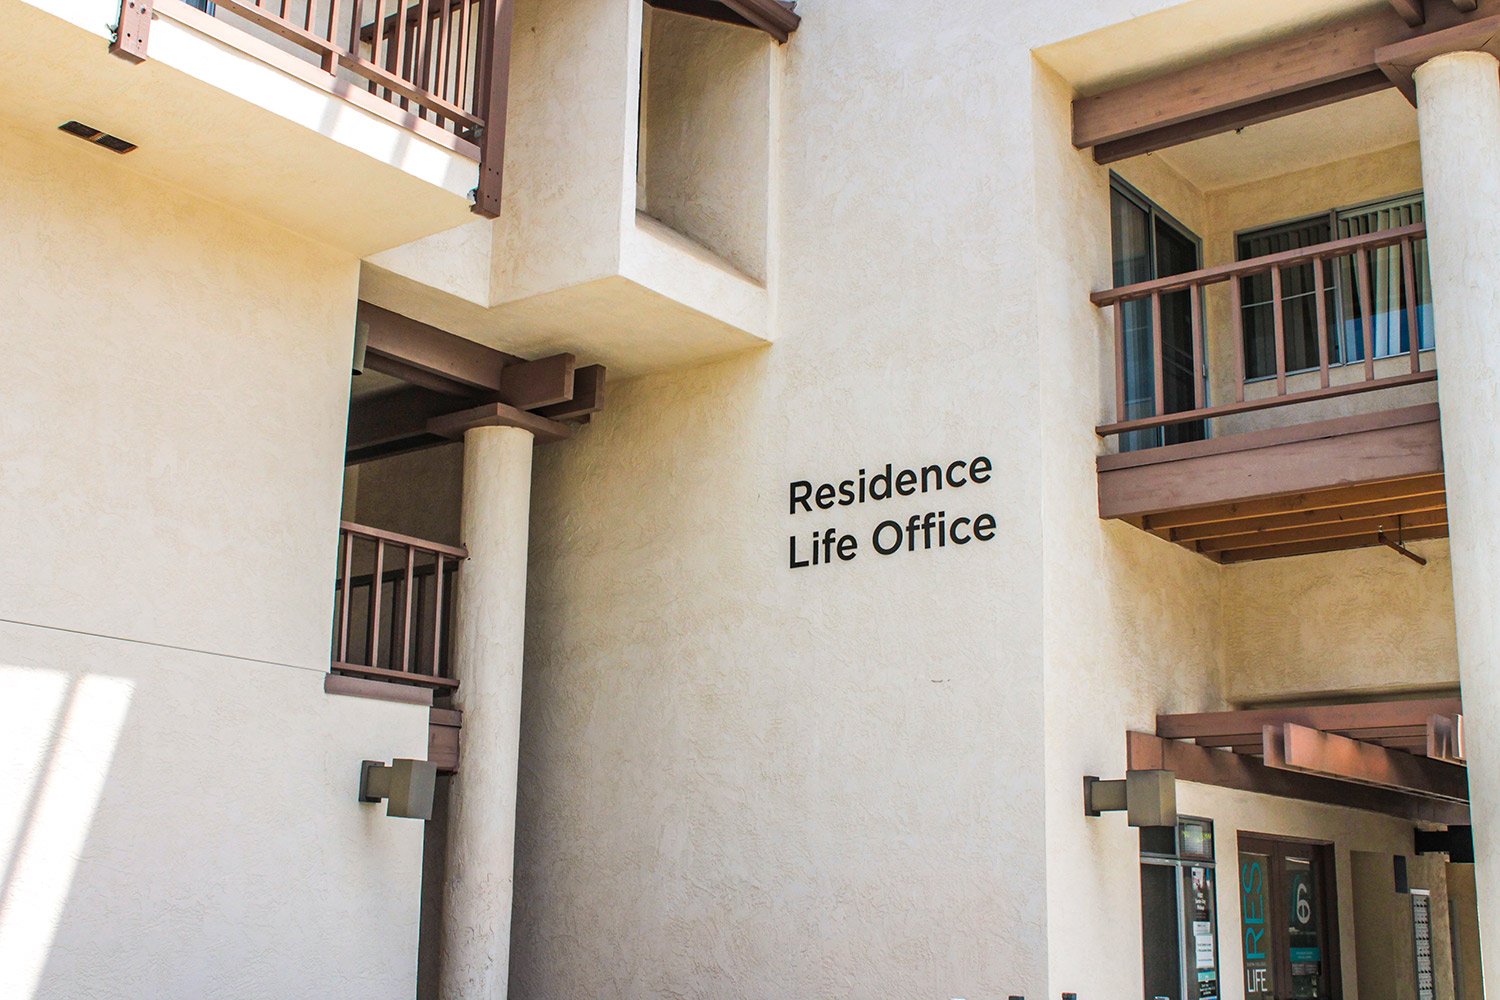 300-UCSD-Residence-2